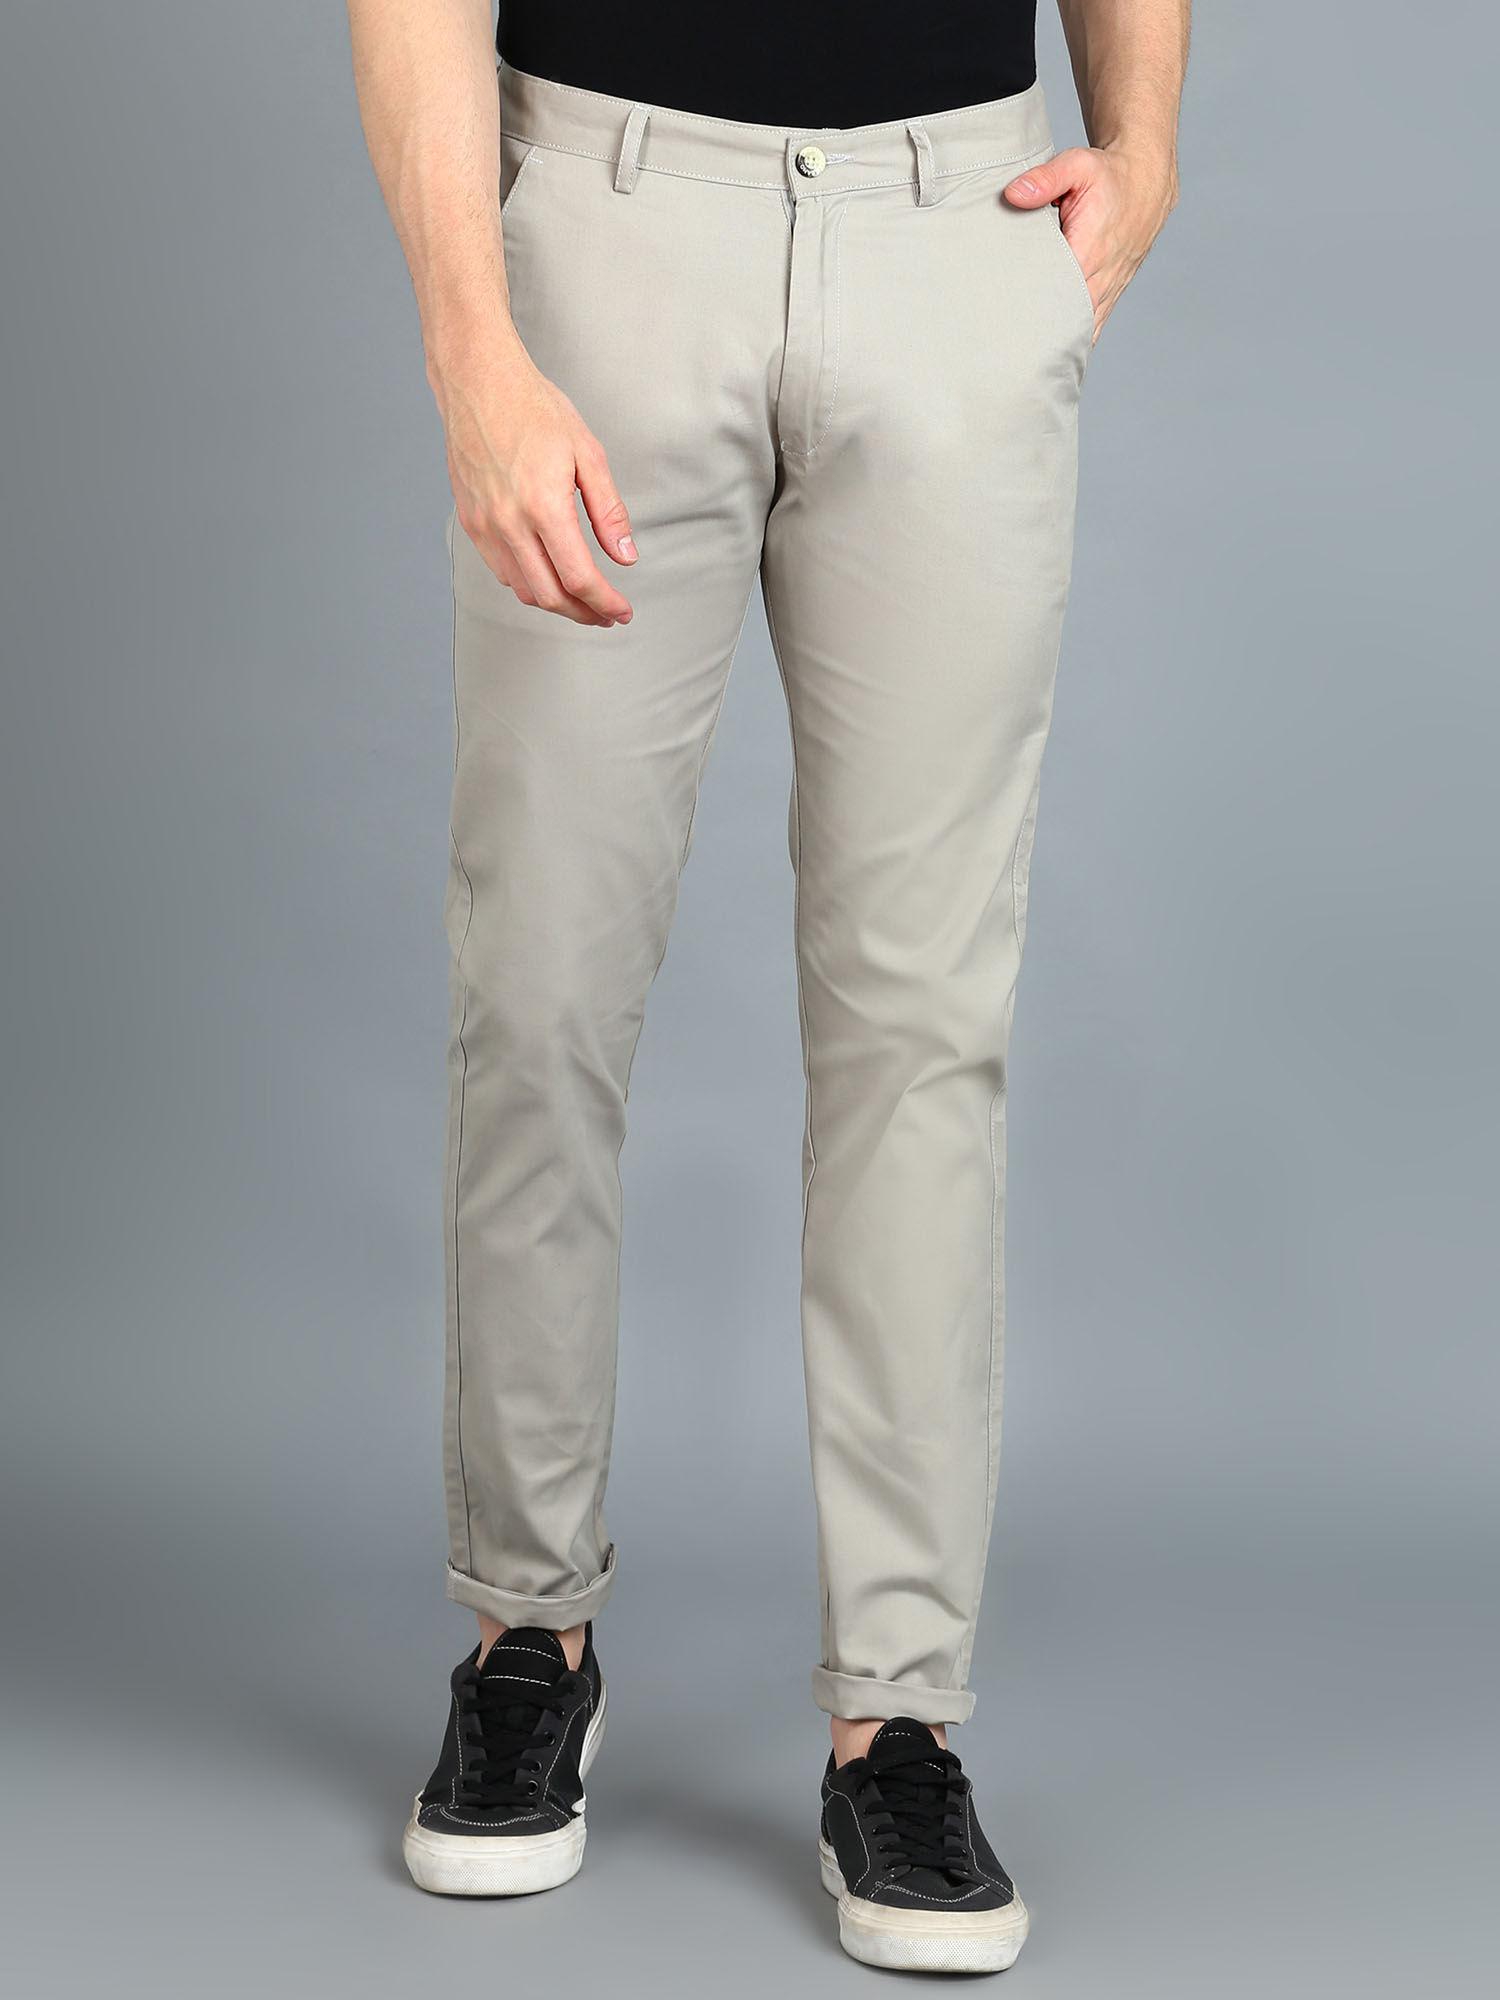 men-grey-cotton-slim-fit-casual-chinos-trousers